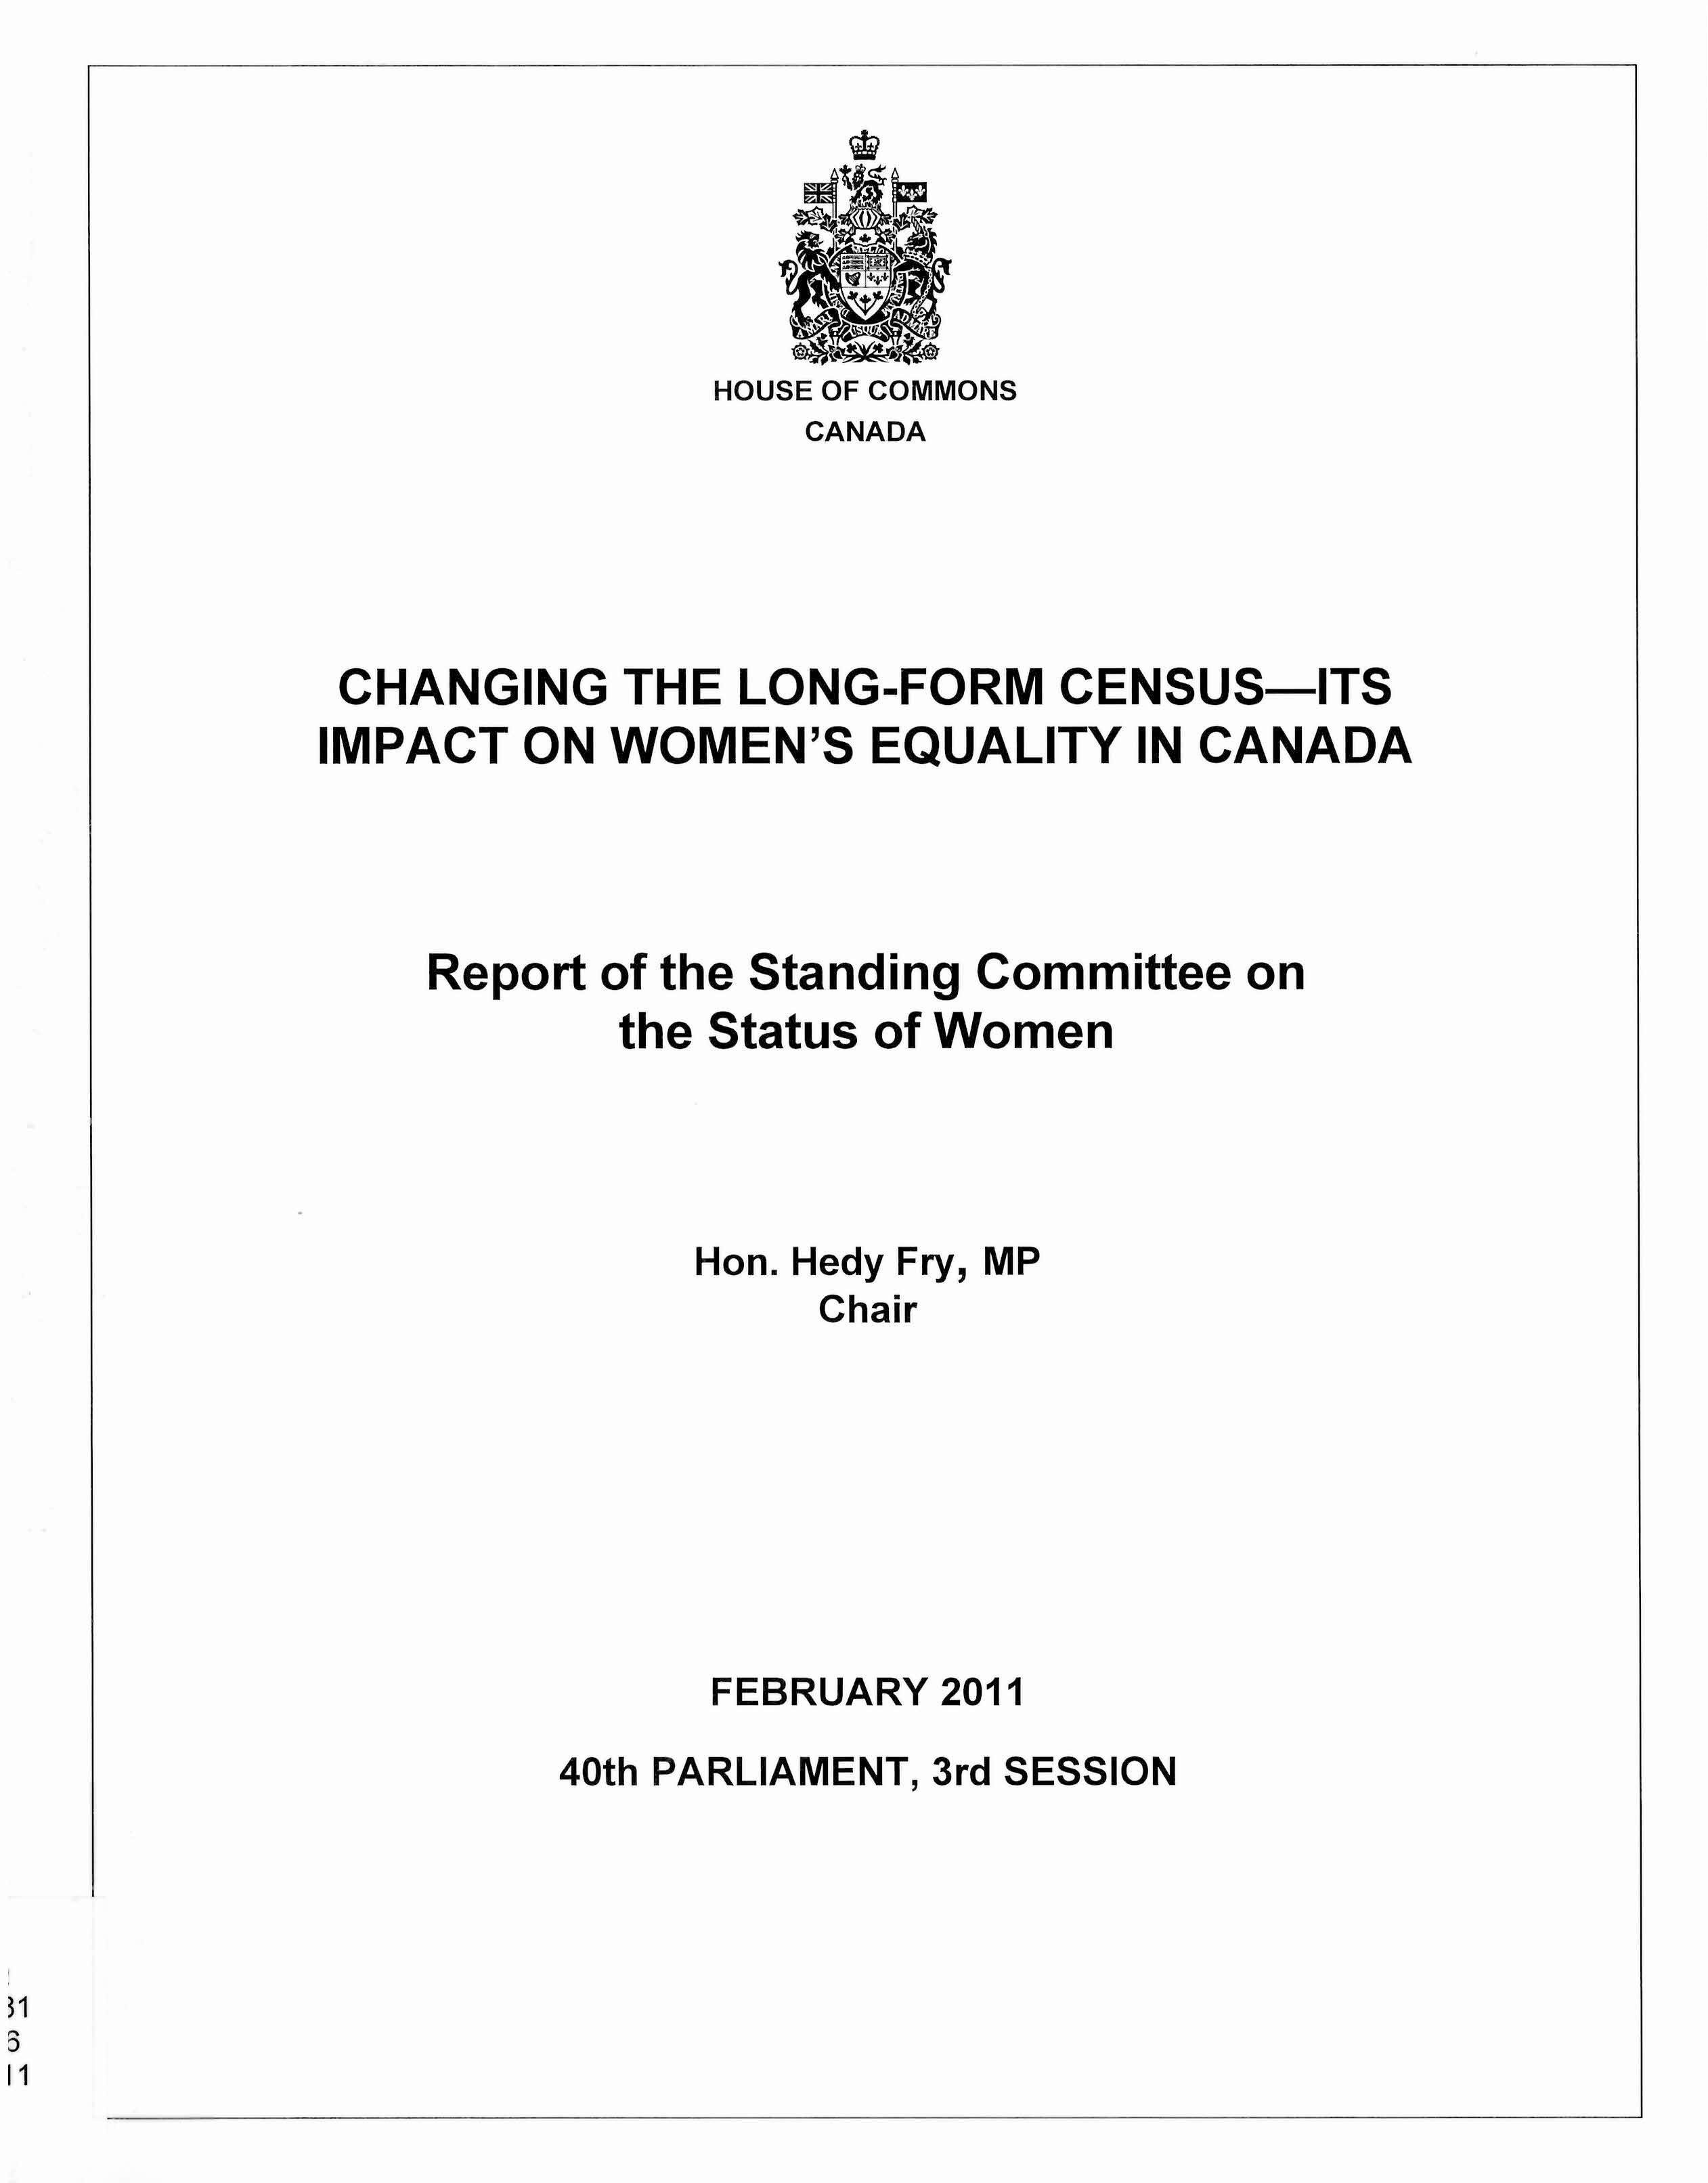 Changing the long-form census, its impact on women's equality in Canada : report of the Standing Committee on the Status of Women